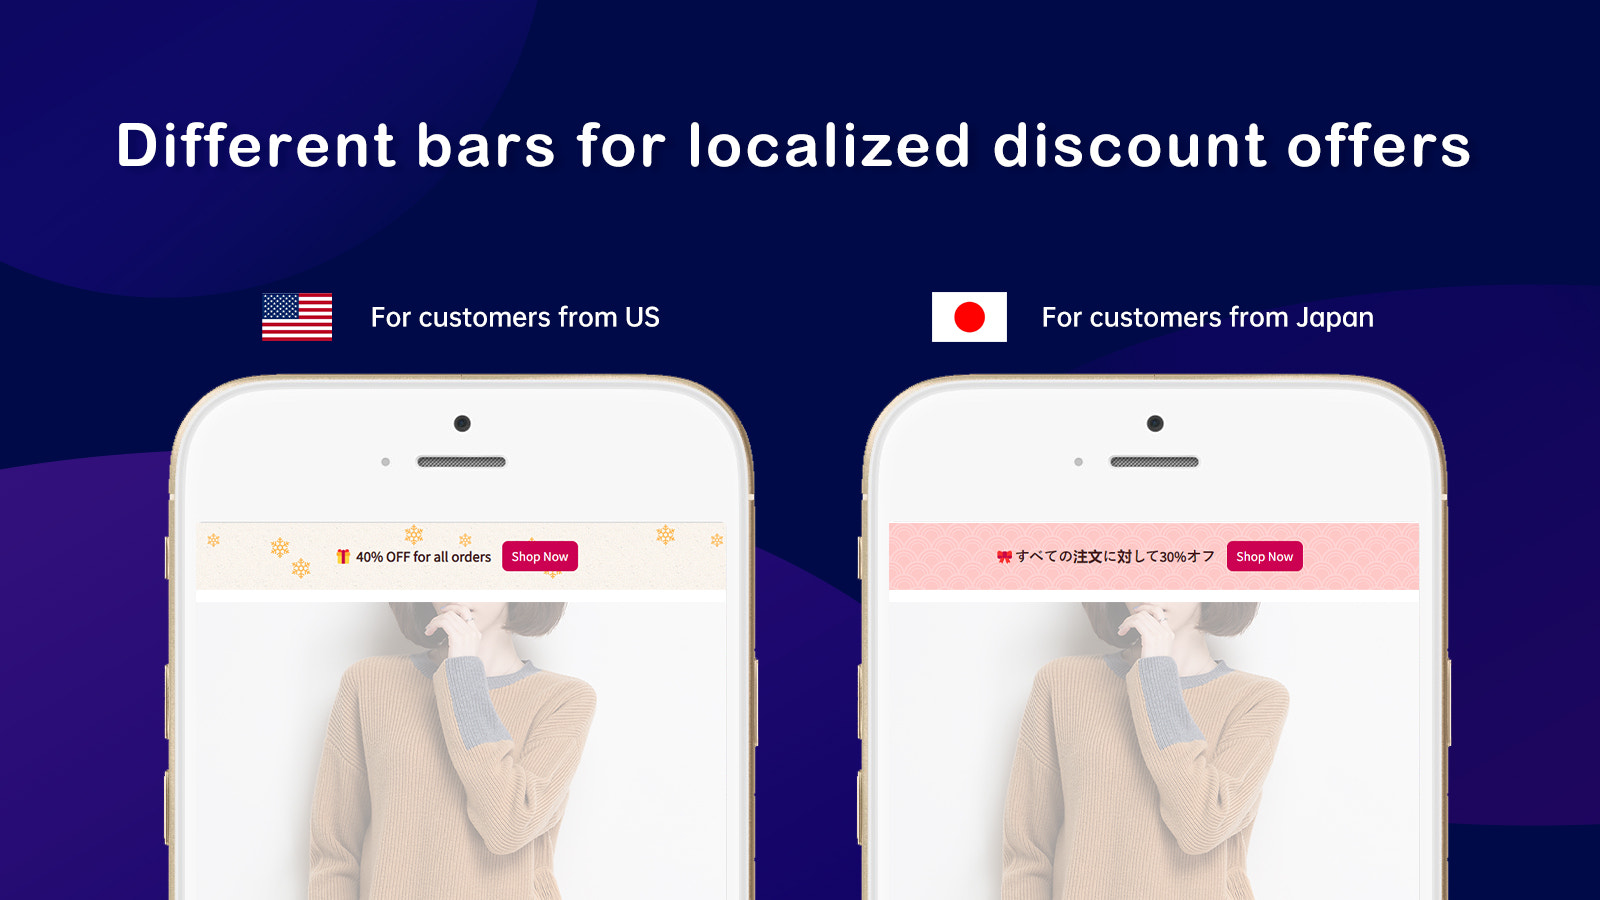 Different bars for localized discount offers